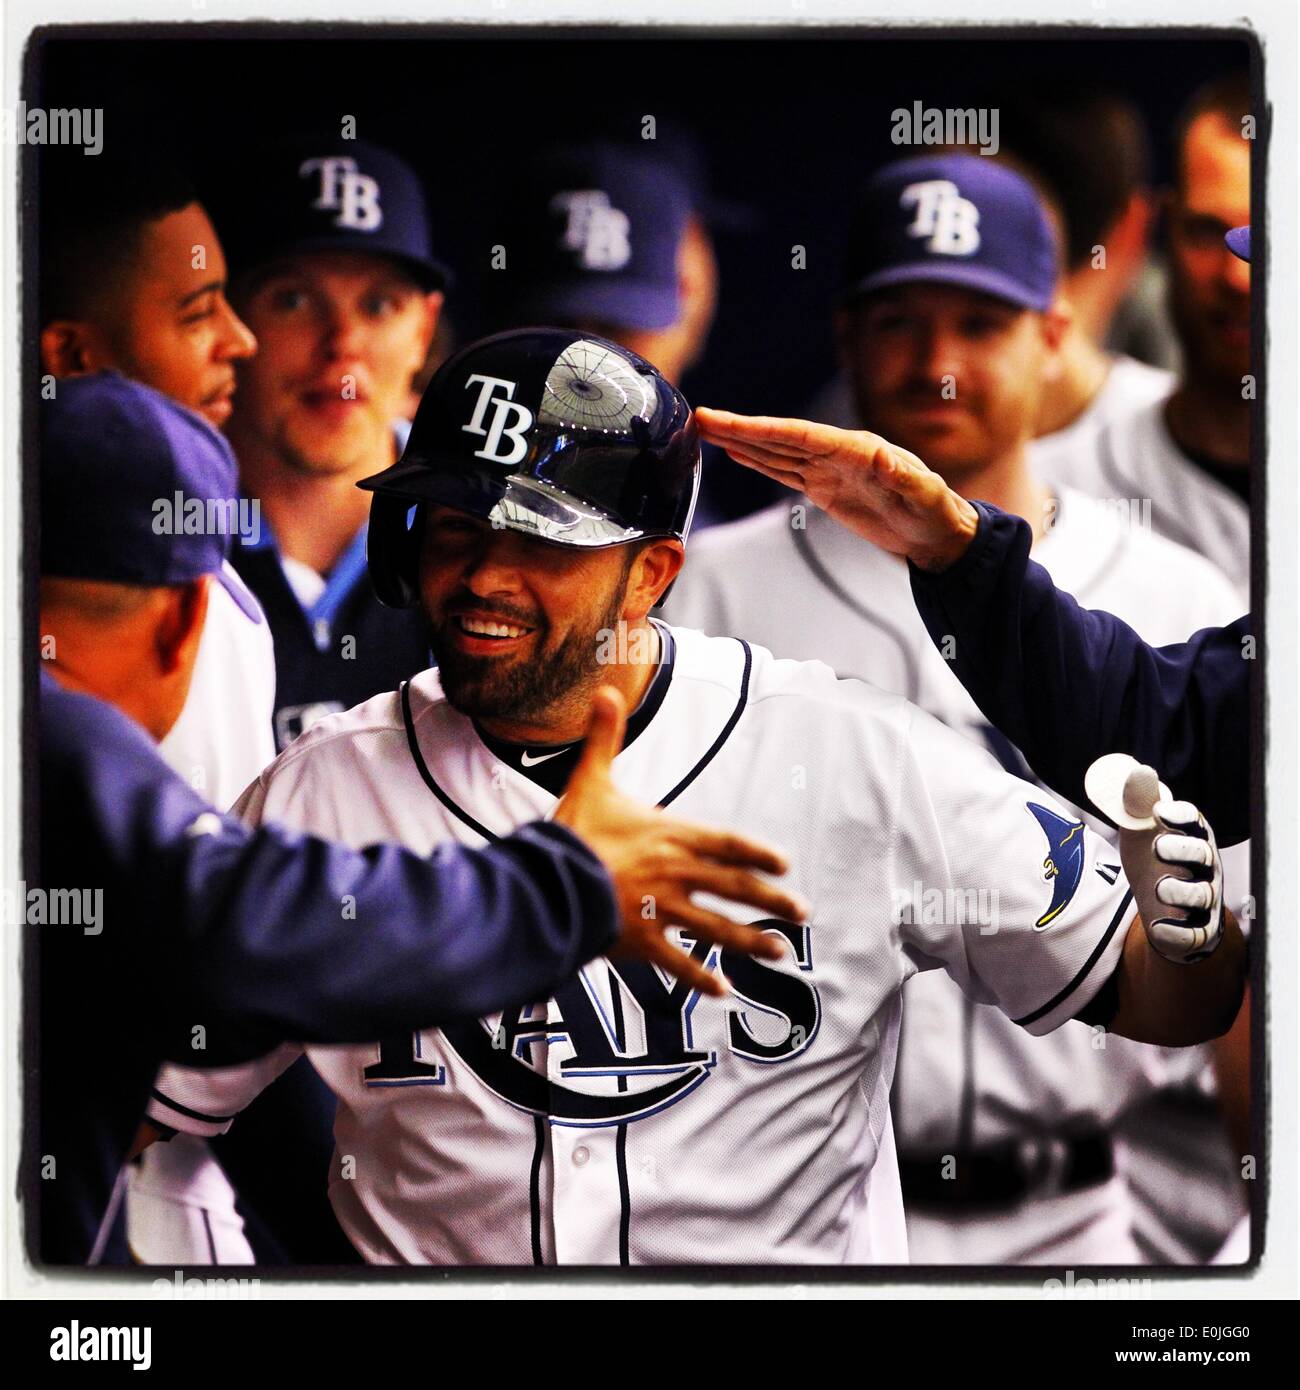 Tampa, Florida, USA. 24th Apr, 2014. WILL VRAGOVIC | TIMES.#Rays DeJesus with a 2-run homer in the 2nd against #twins #mlb #baseball.Instagrams from Rays Spring Training and the start of the 2014 season. © Will Vragovic/Tampa Bay Times/ZUMAPRESS.com/Alamy Live News Stock Photo